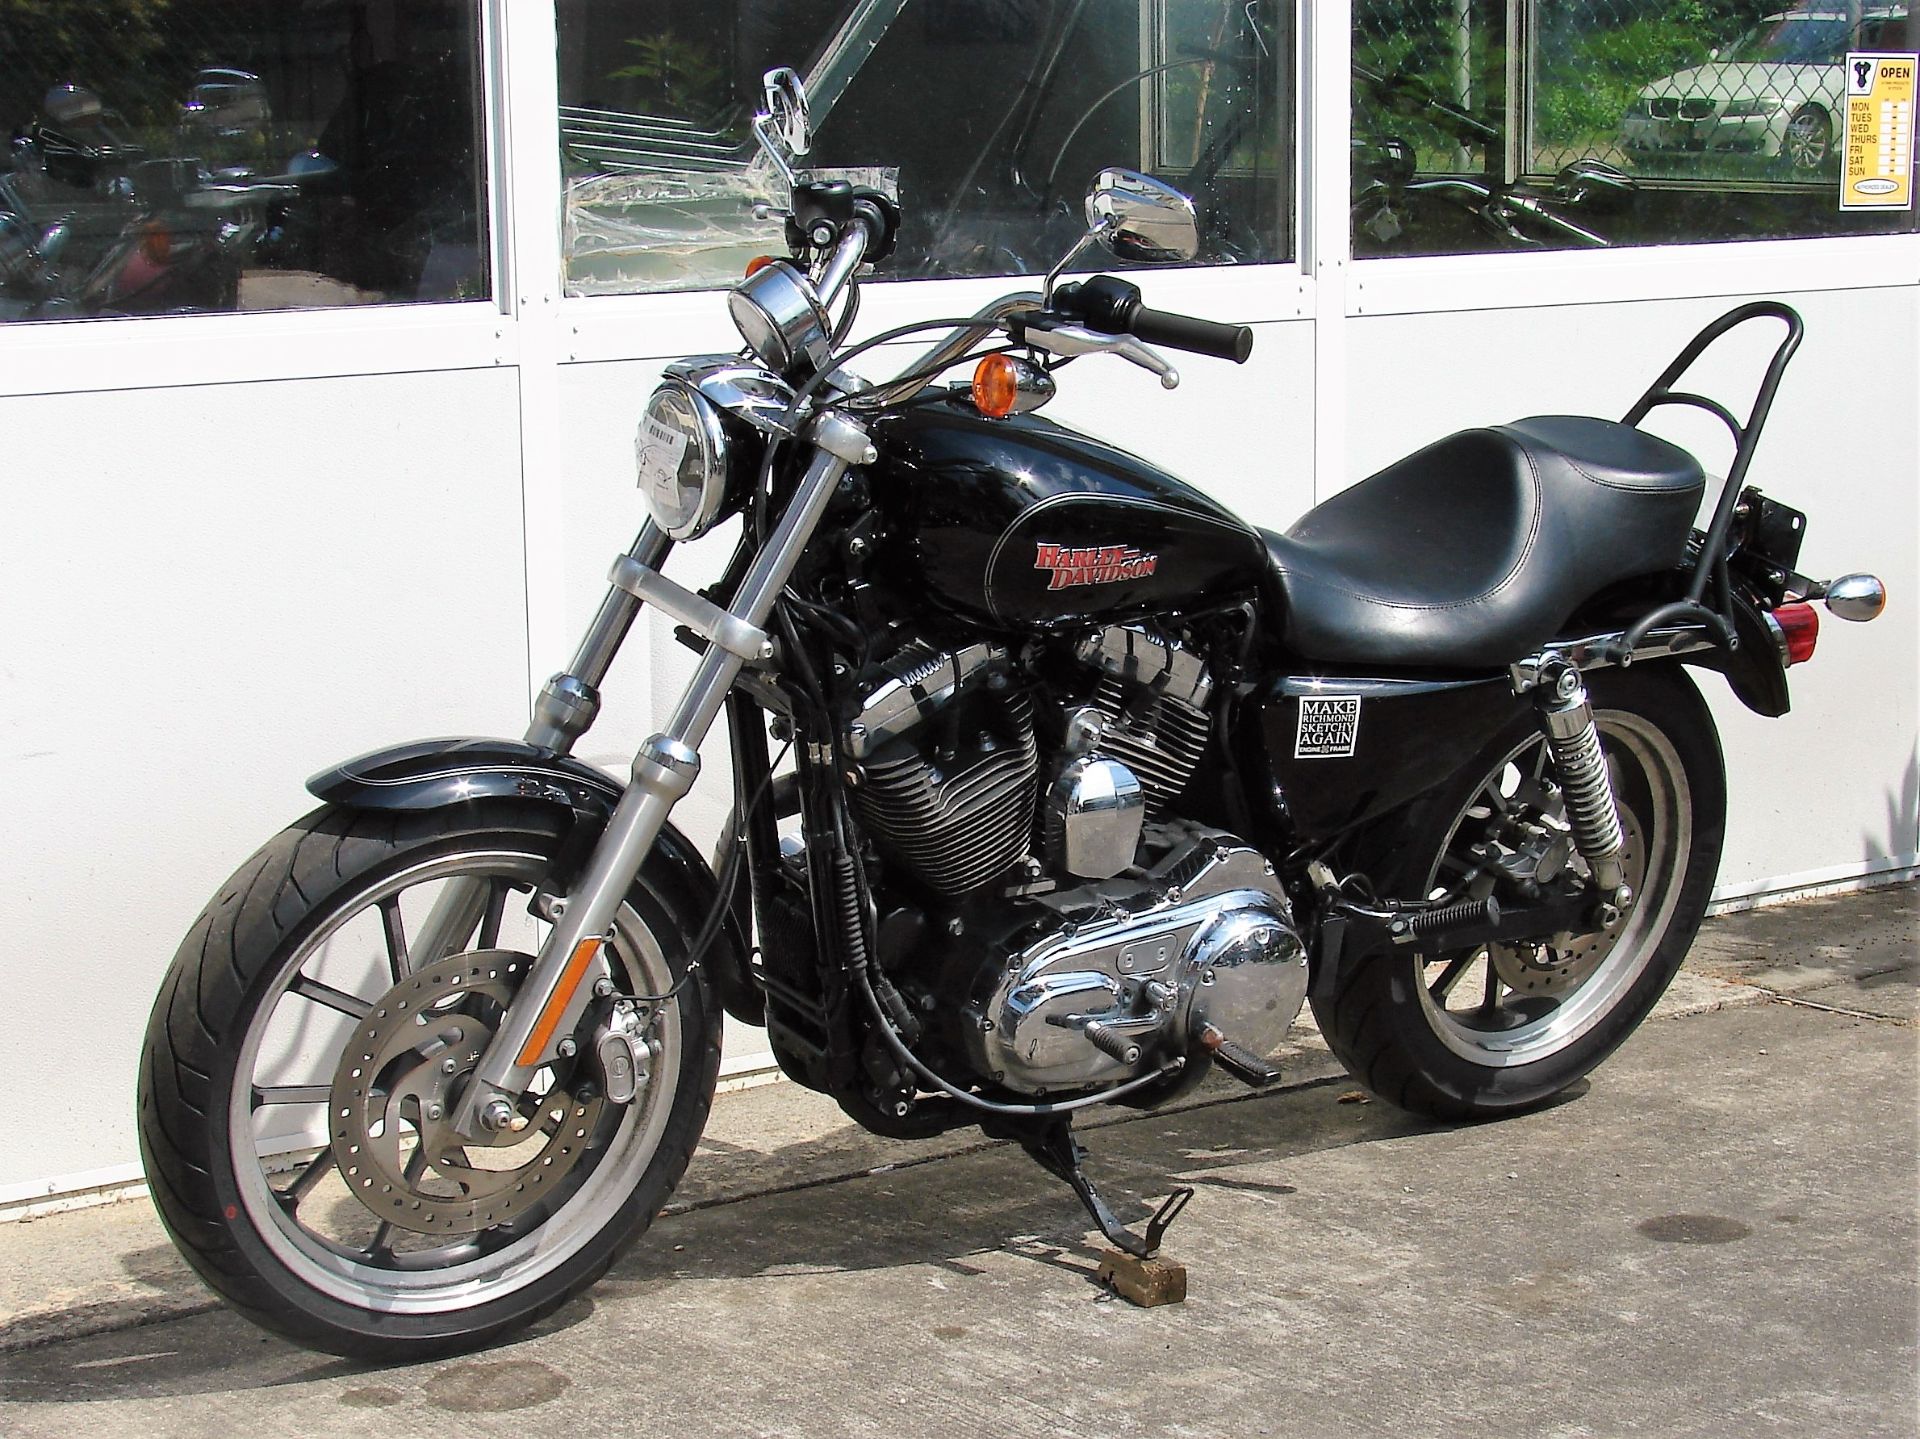 2014 Harley-Davidson XL 1200 T Super Low Sportster in Williamstown, New Jersey - Photo 9